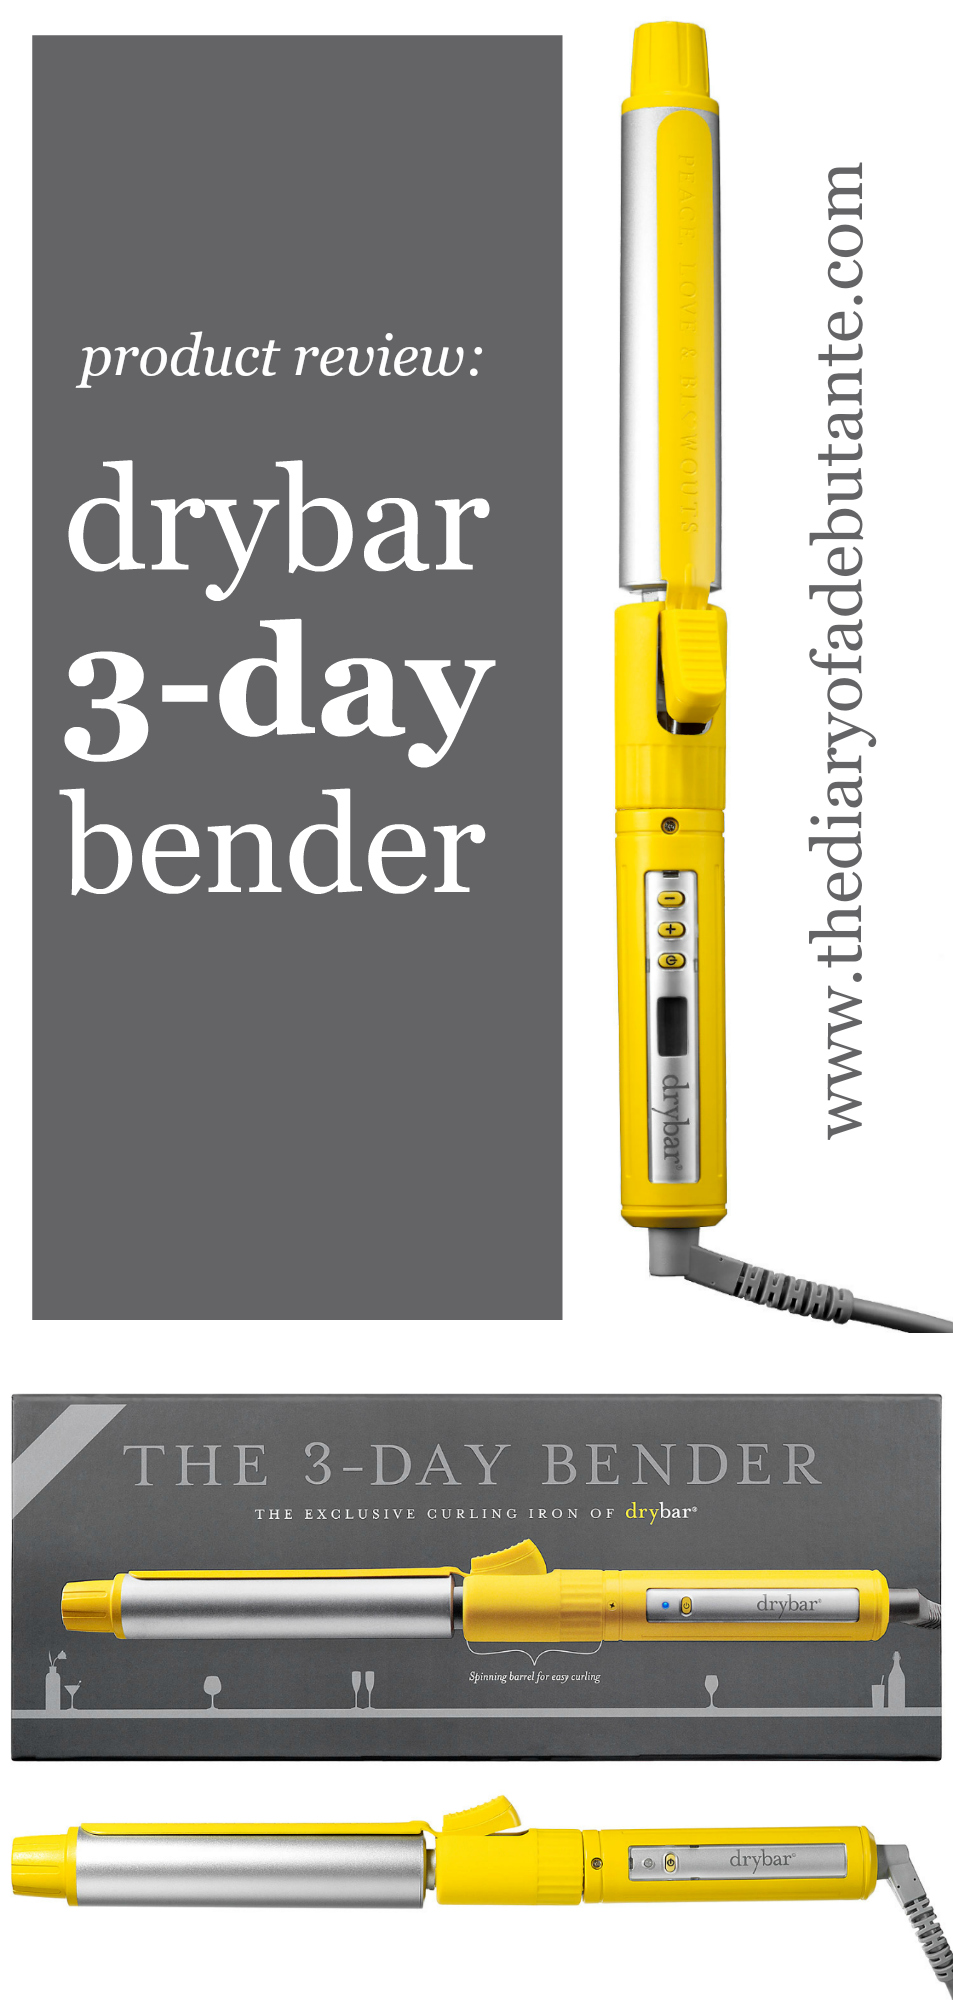 A review of the drybar 3-day bender curling iron